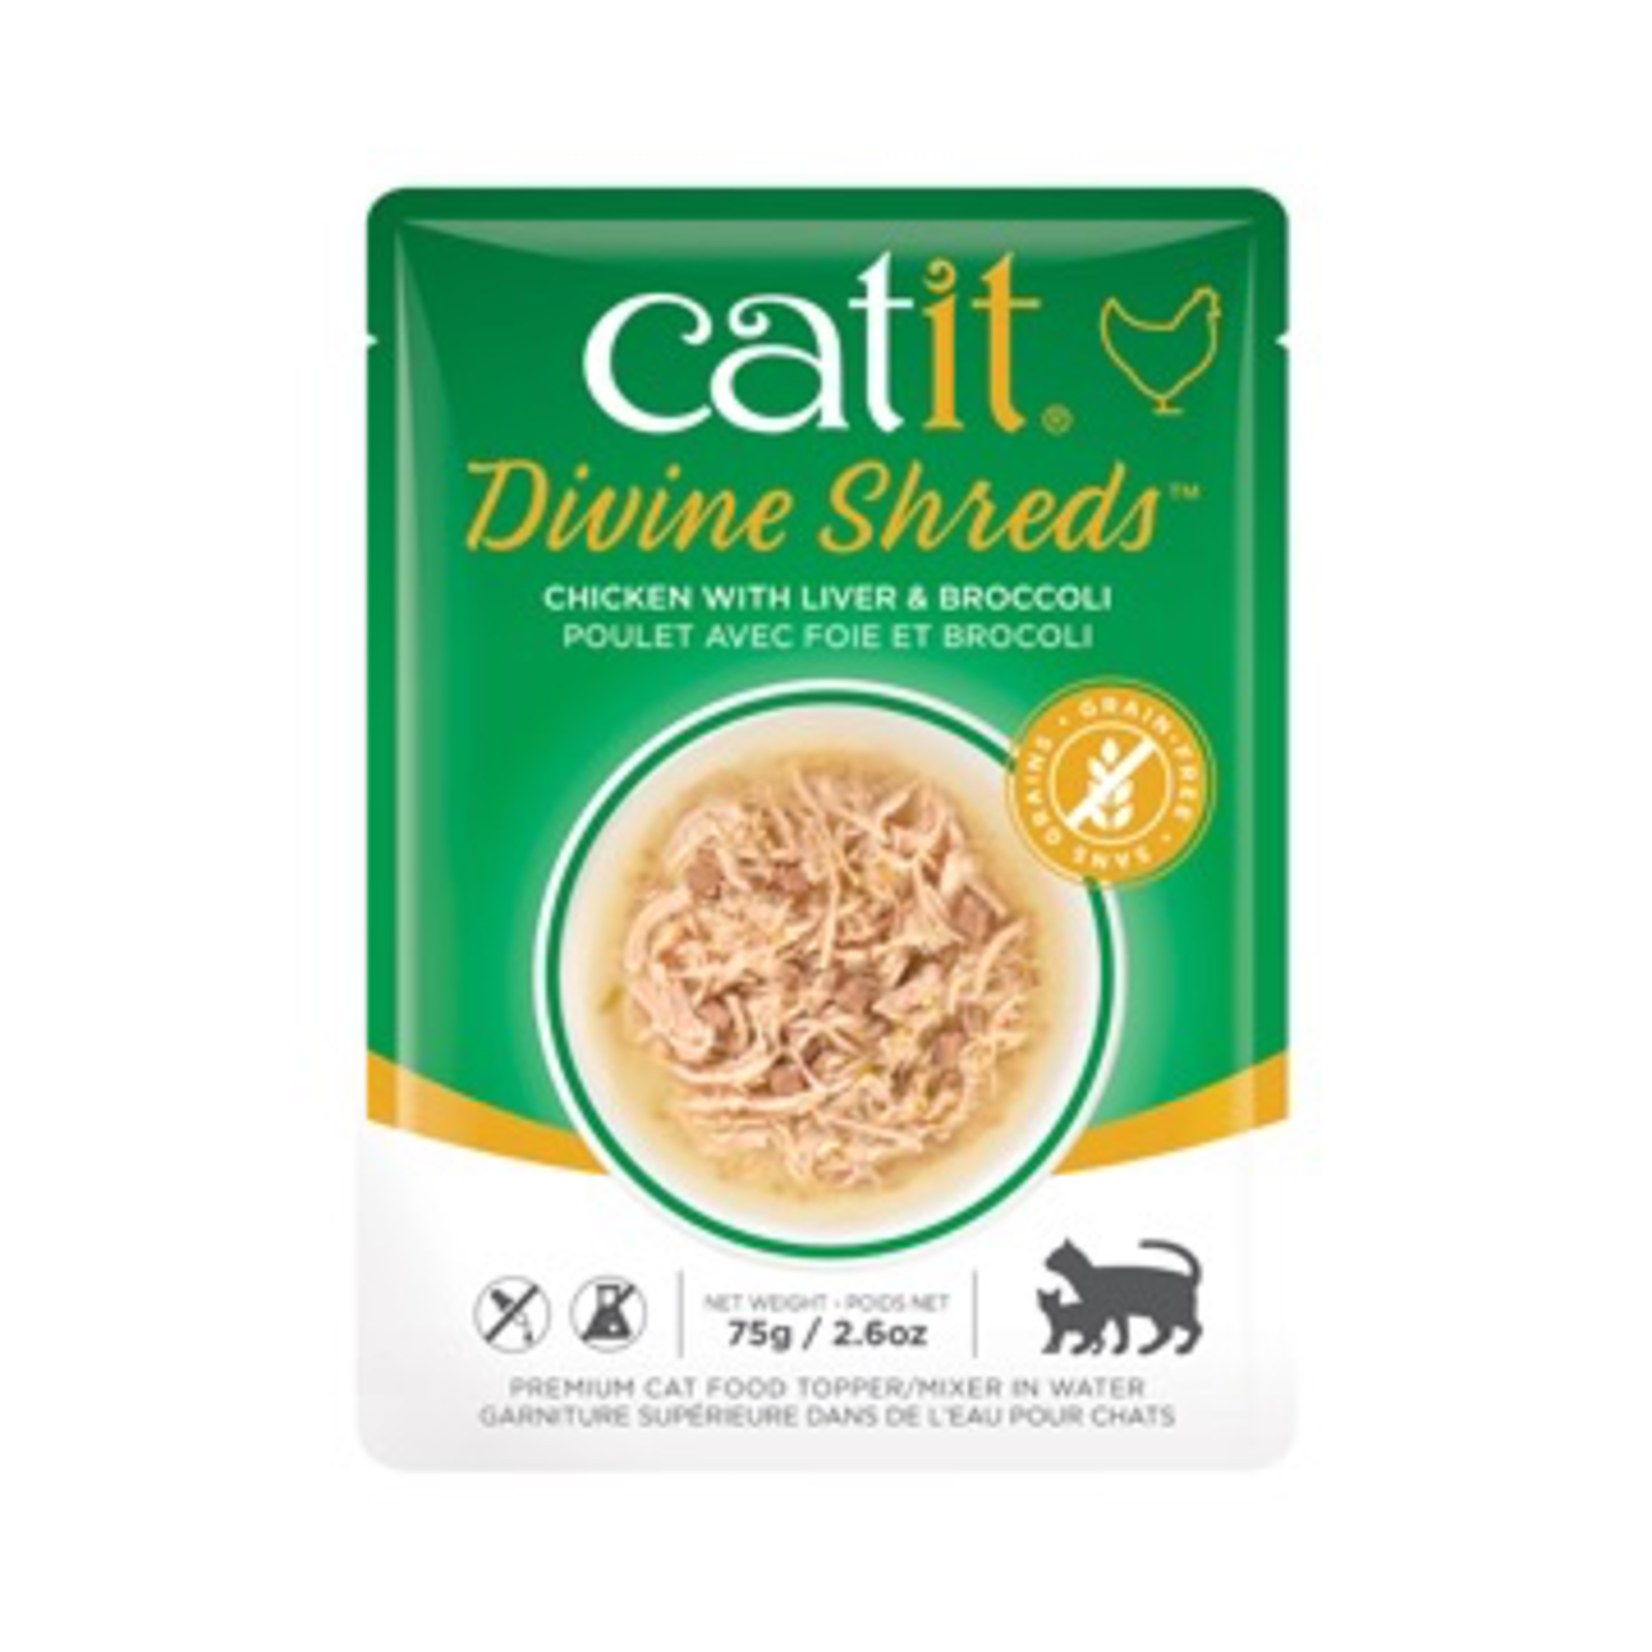 CAT IT Catit Divine Shreds - Chicken with Liver & Broccoli - 75g Pouch